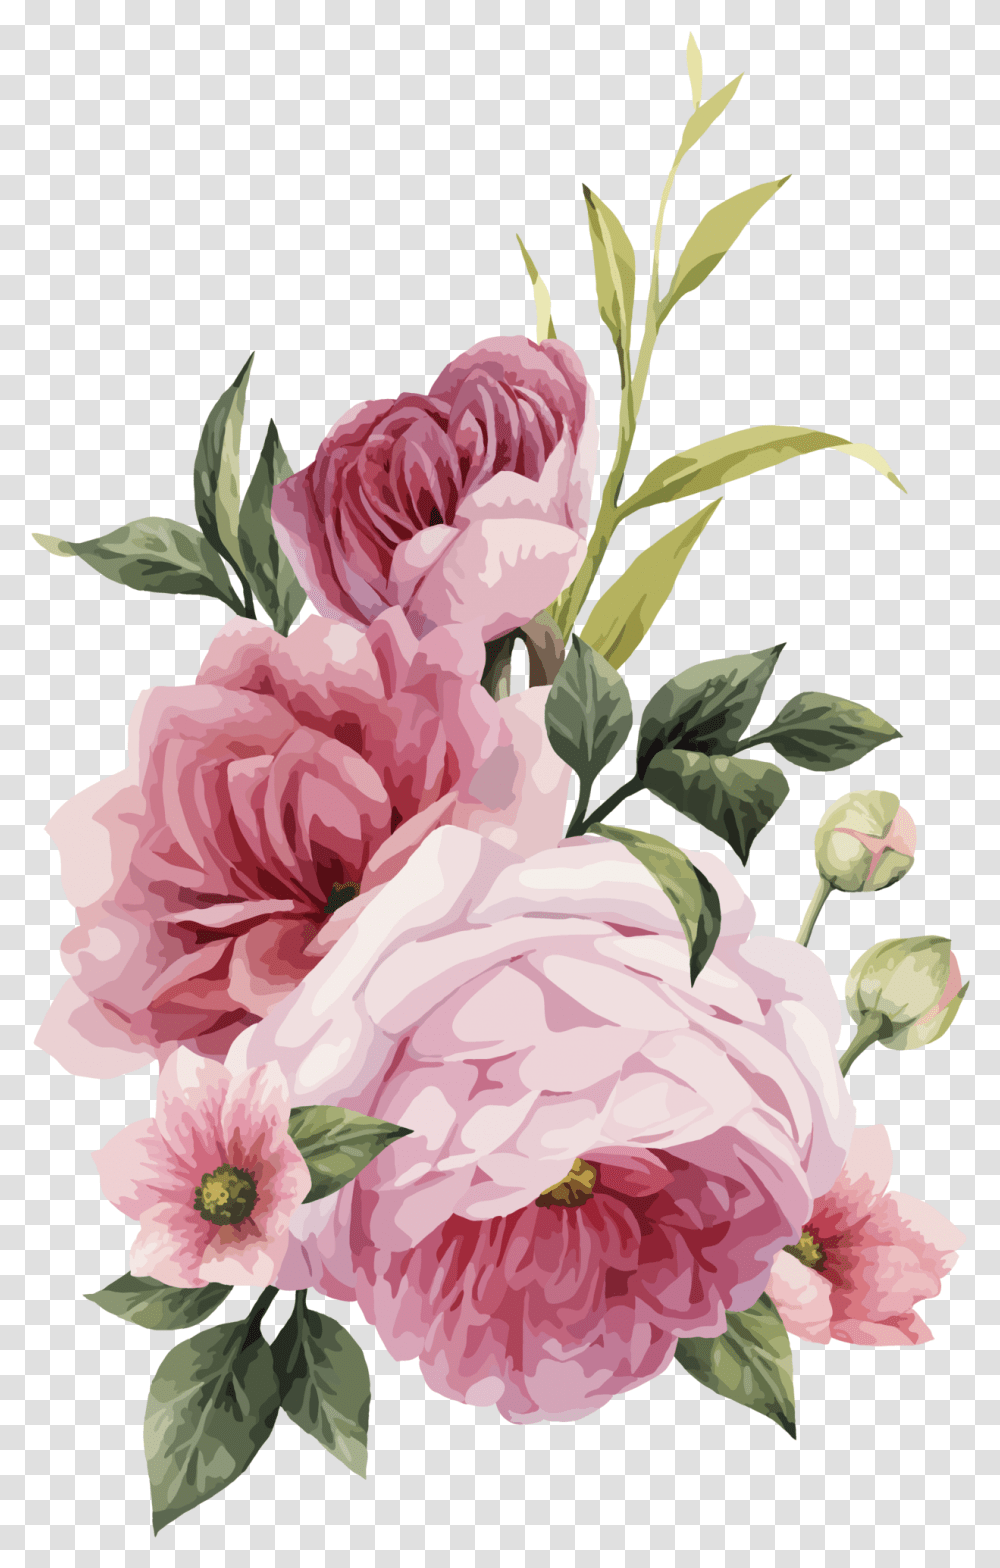 Free Watercolor Wedding Flowers Photo Wedding Flower Bouquet Background, Plant, Blossom, Peony, Floral Design Transparent Png